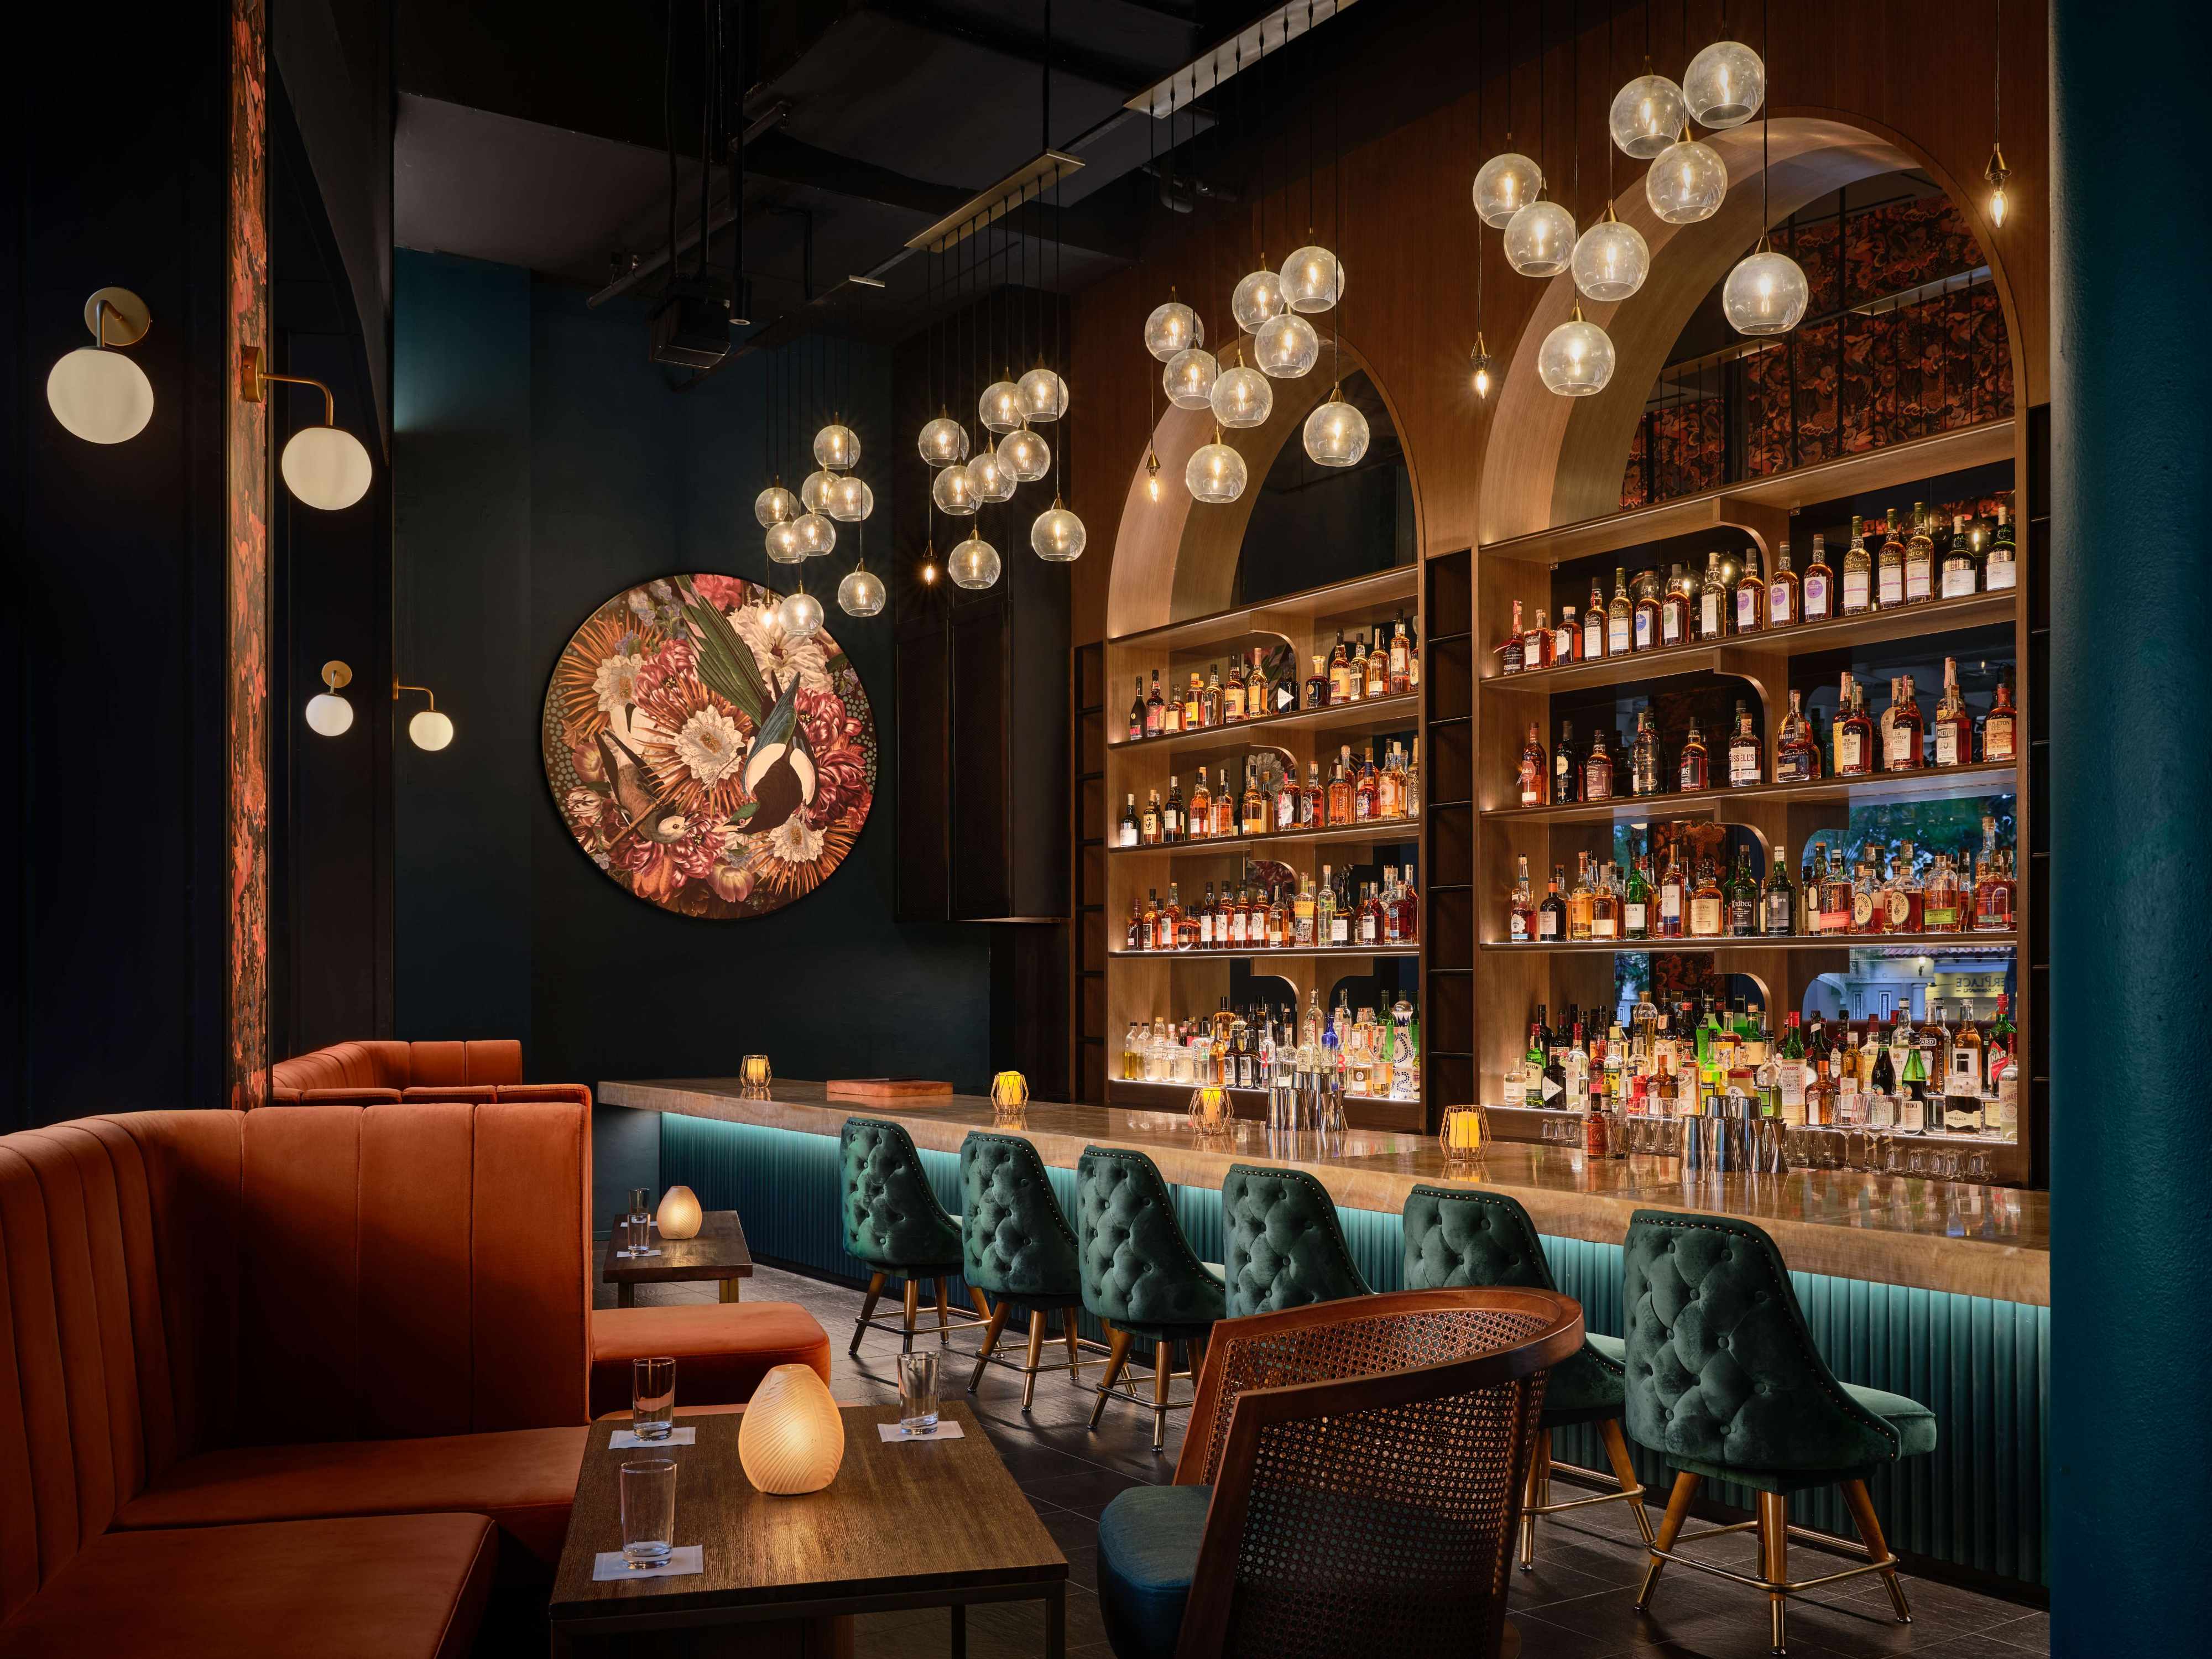 There’s No Better Time To Indulge And Imbibe: 5 New Drinking Spots For Boozy Nights Out